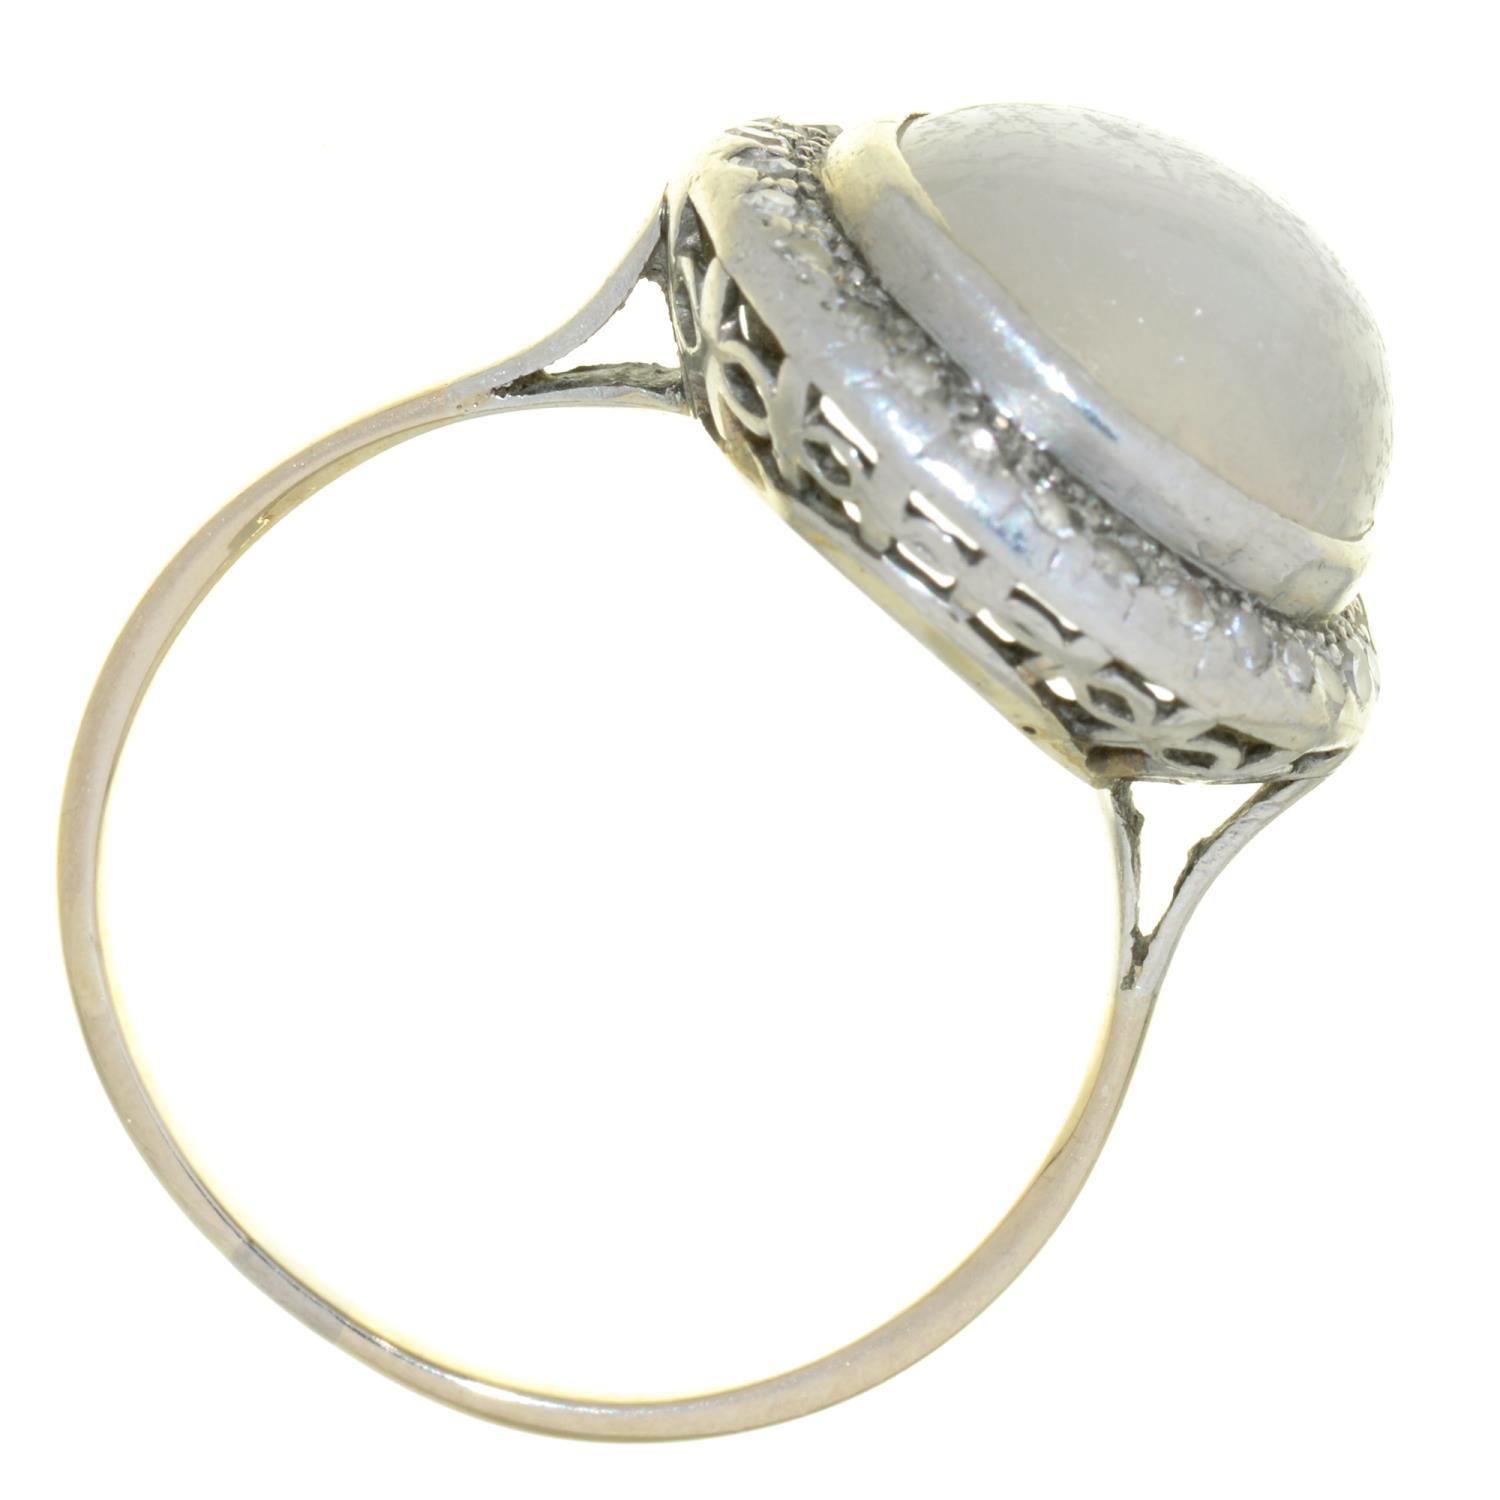 A STAR MOONSTONE AND DIAMOND RING IN WHITE GOLD, MOONSTONE CABOCHON APPROX 12 MM DIAM, UNAMRKED, 6. - Image 2 of 2